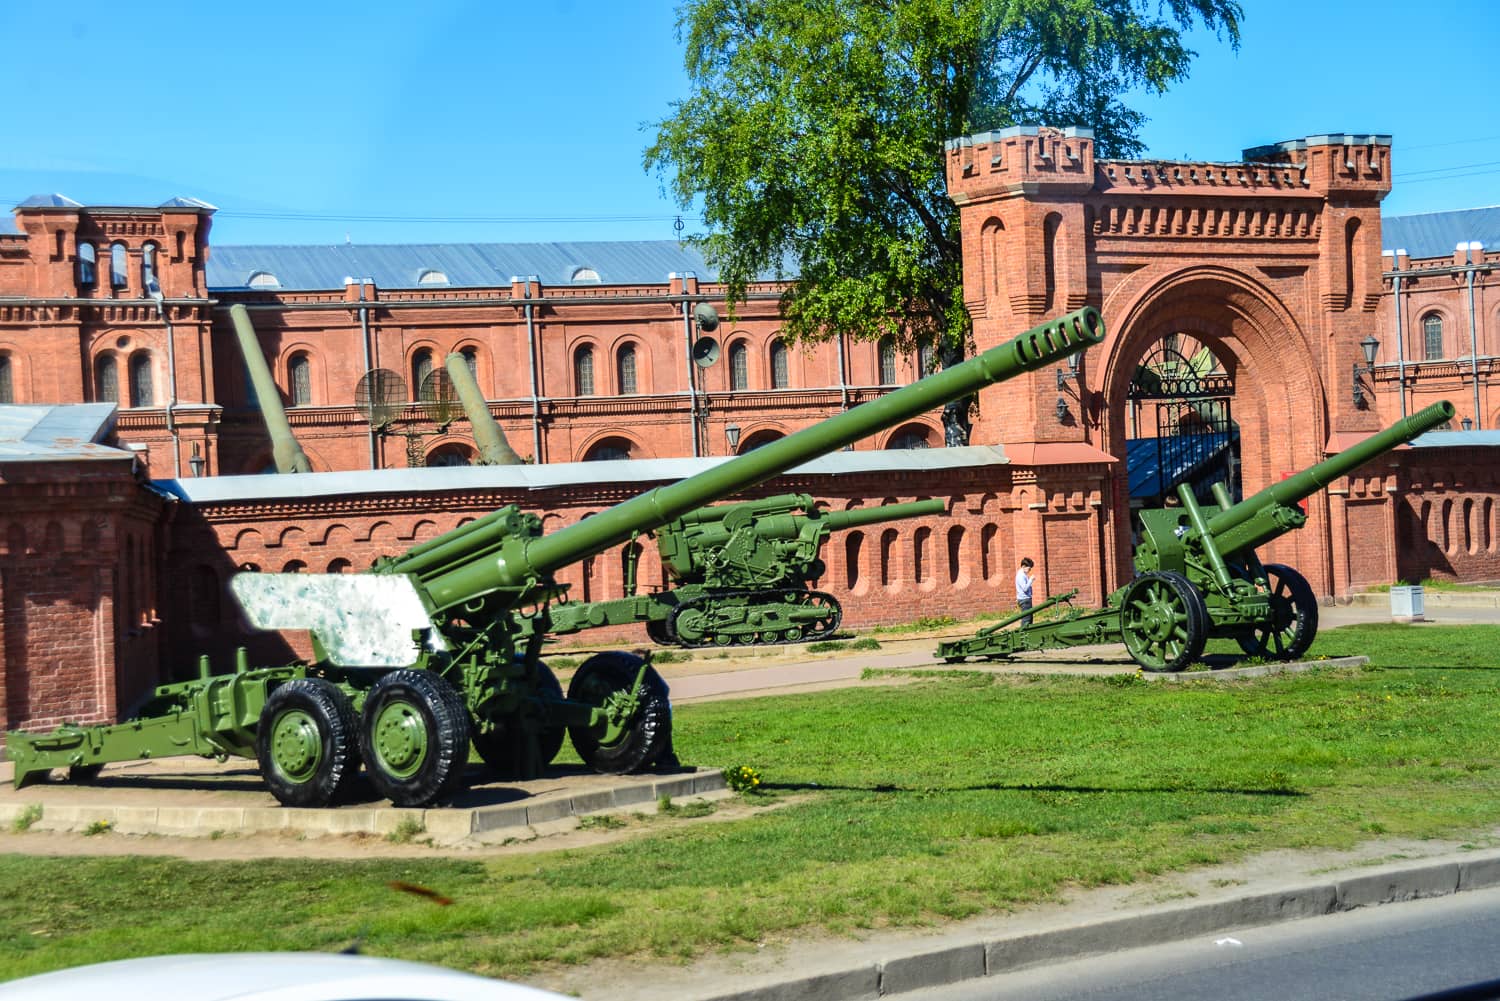 We pass the military museum which reminds us that Saint Petersburg was extensively damaged during the last war.